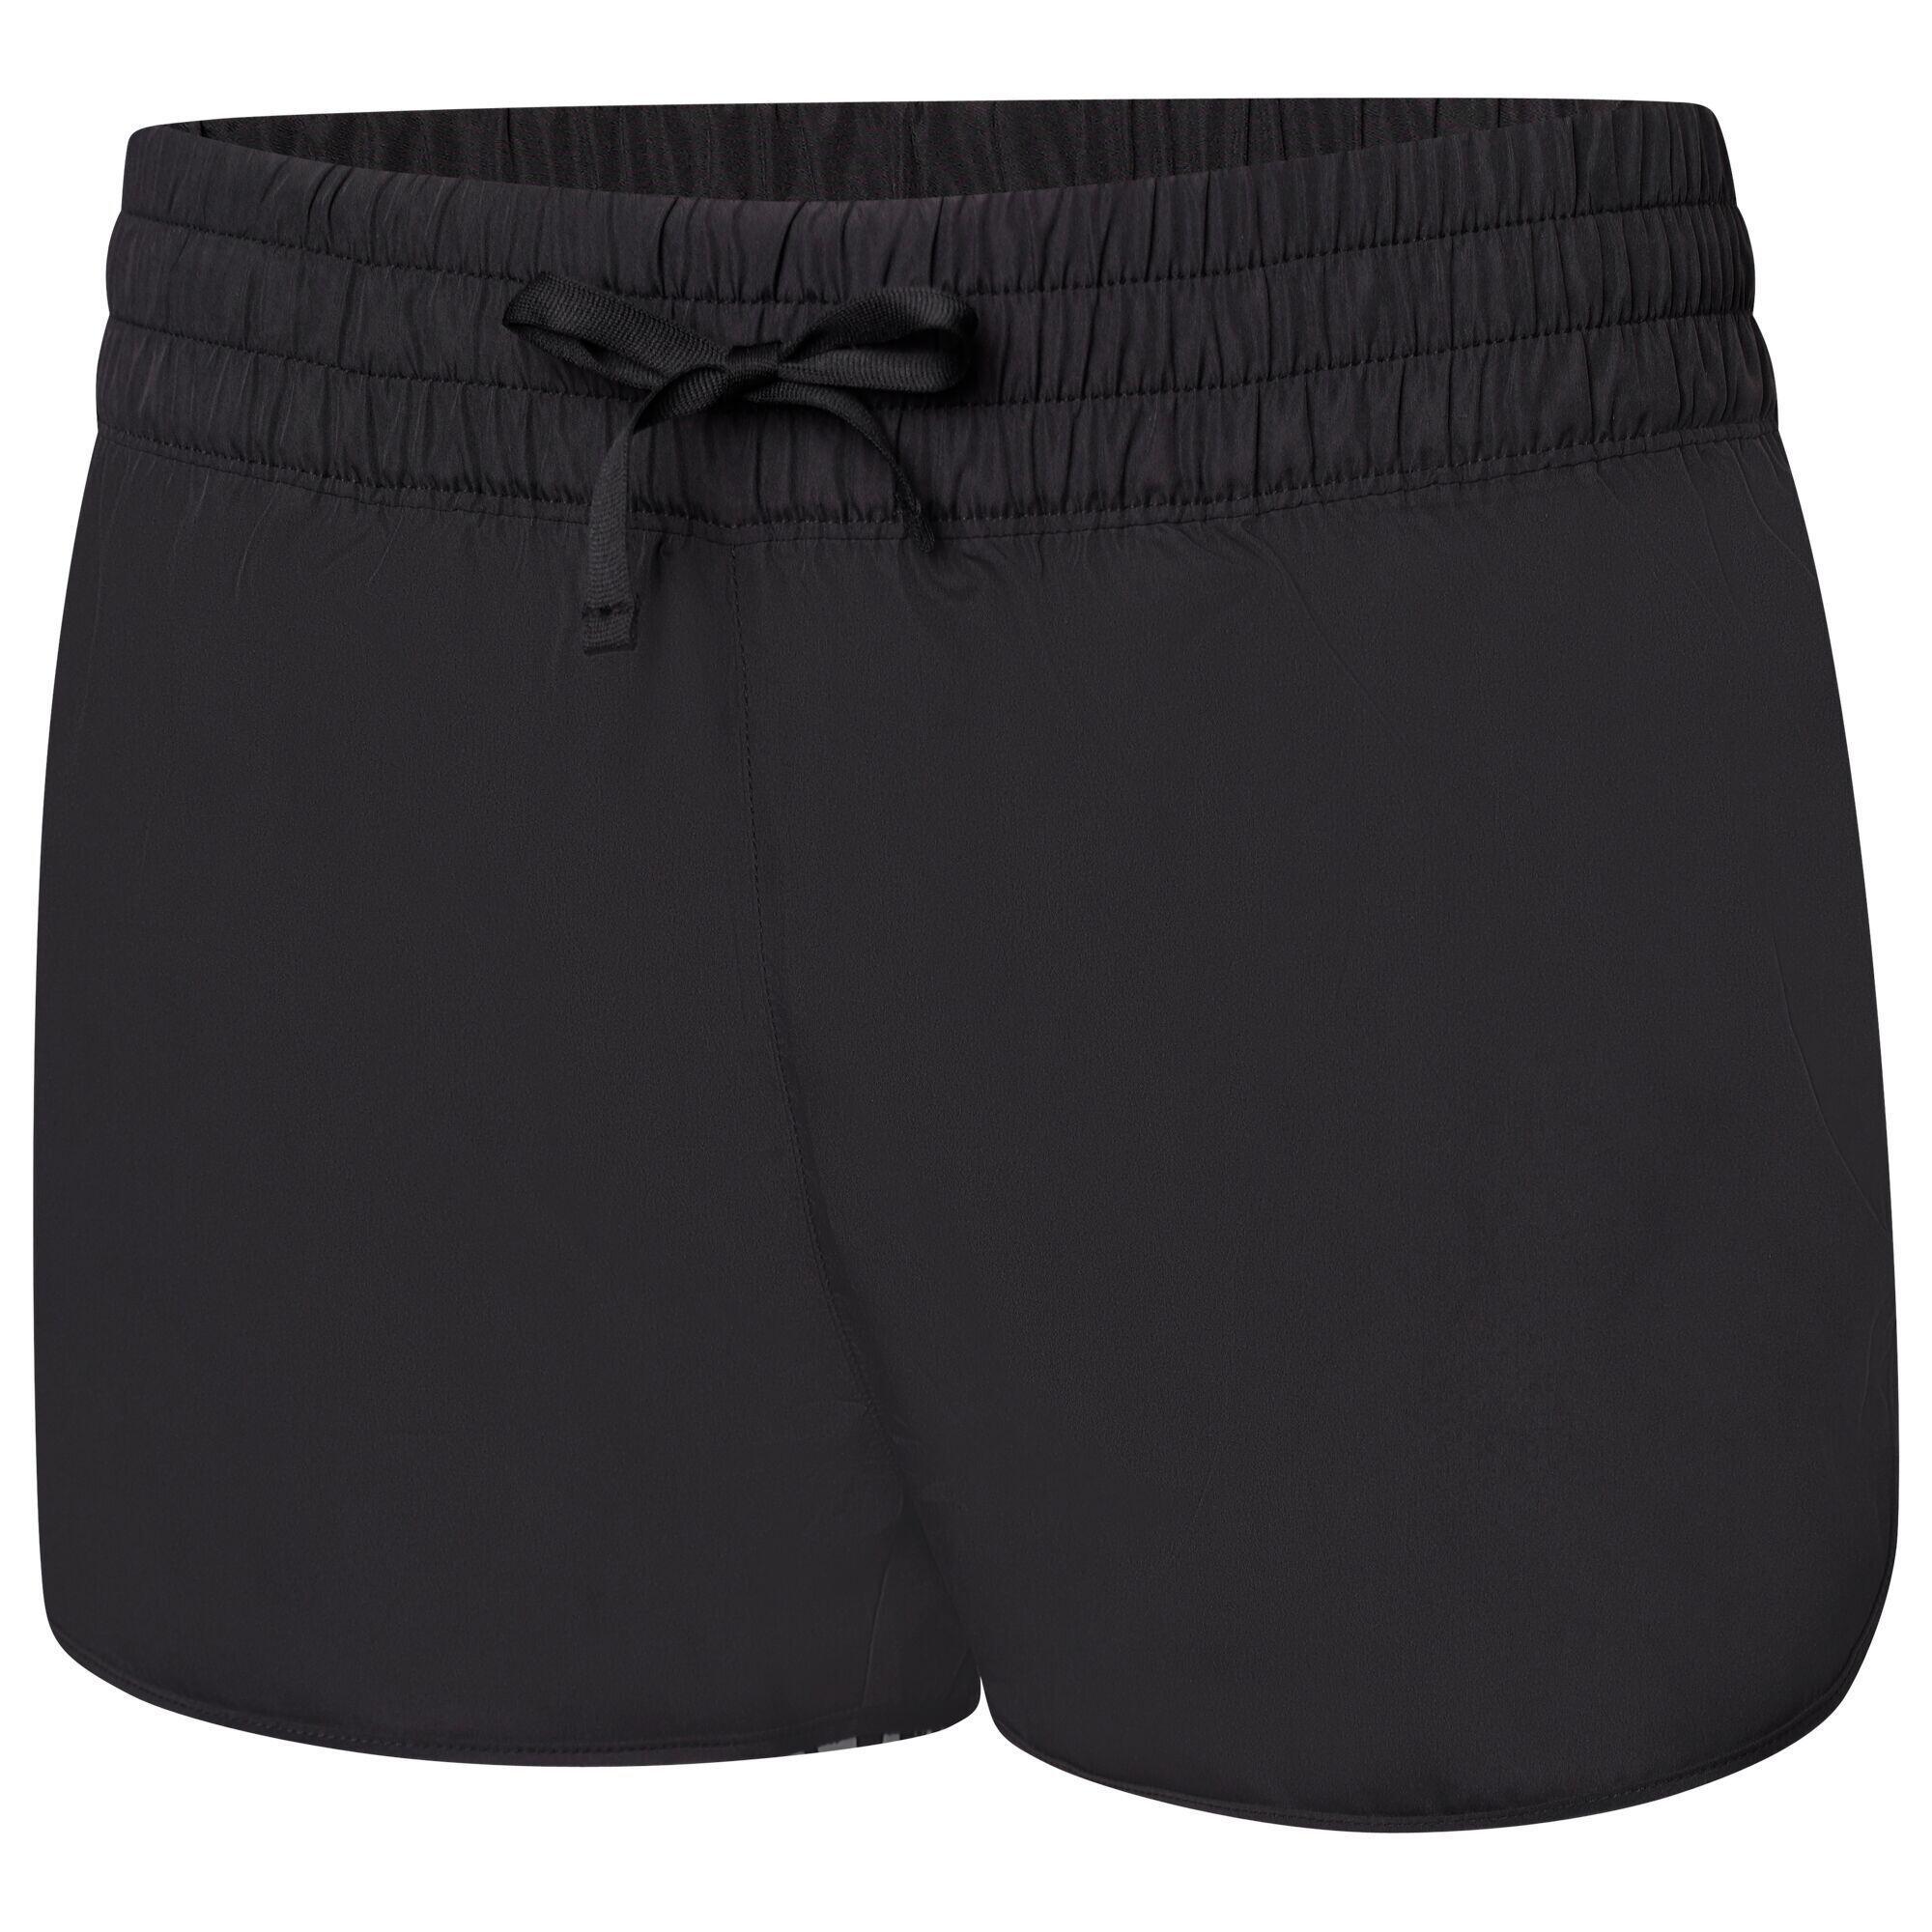 Womens/Ladies Sprint Up 2 in 1 Shorts (Black/White) 3/5